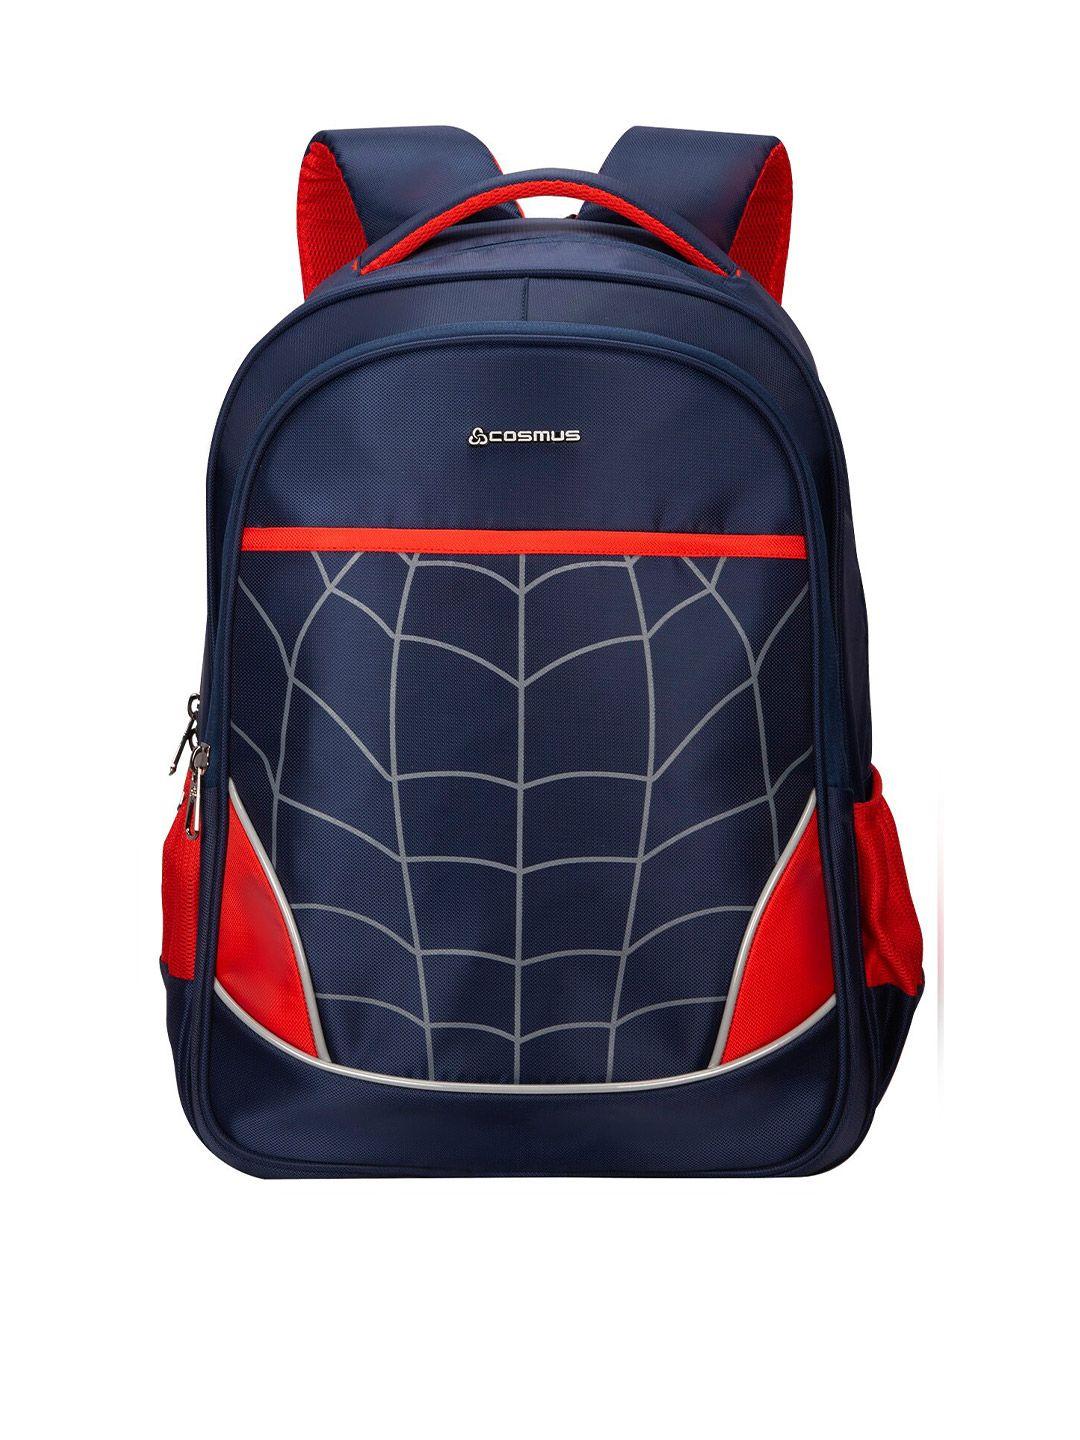 cosmus unisex navy blue & red graphic backpack